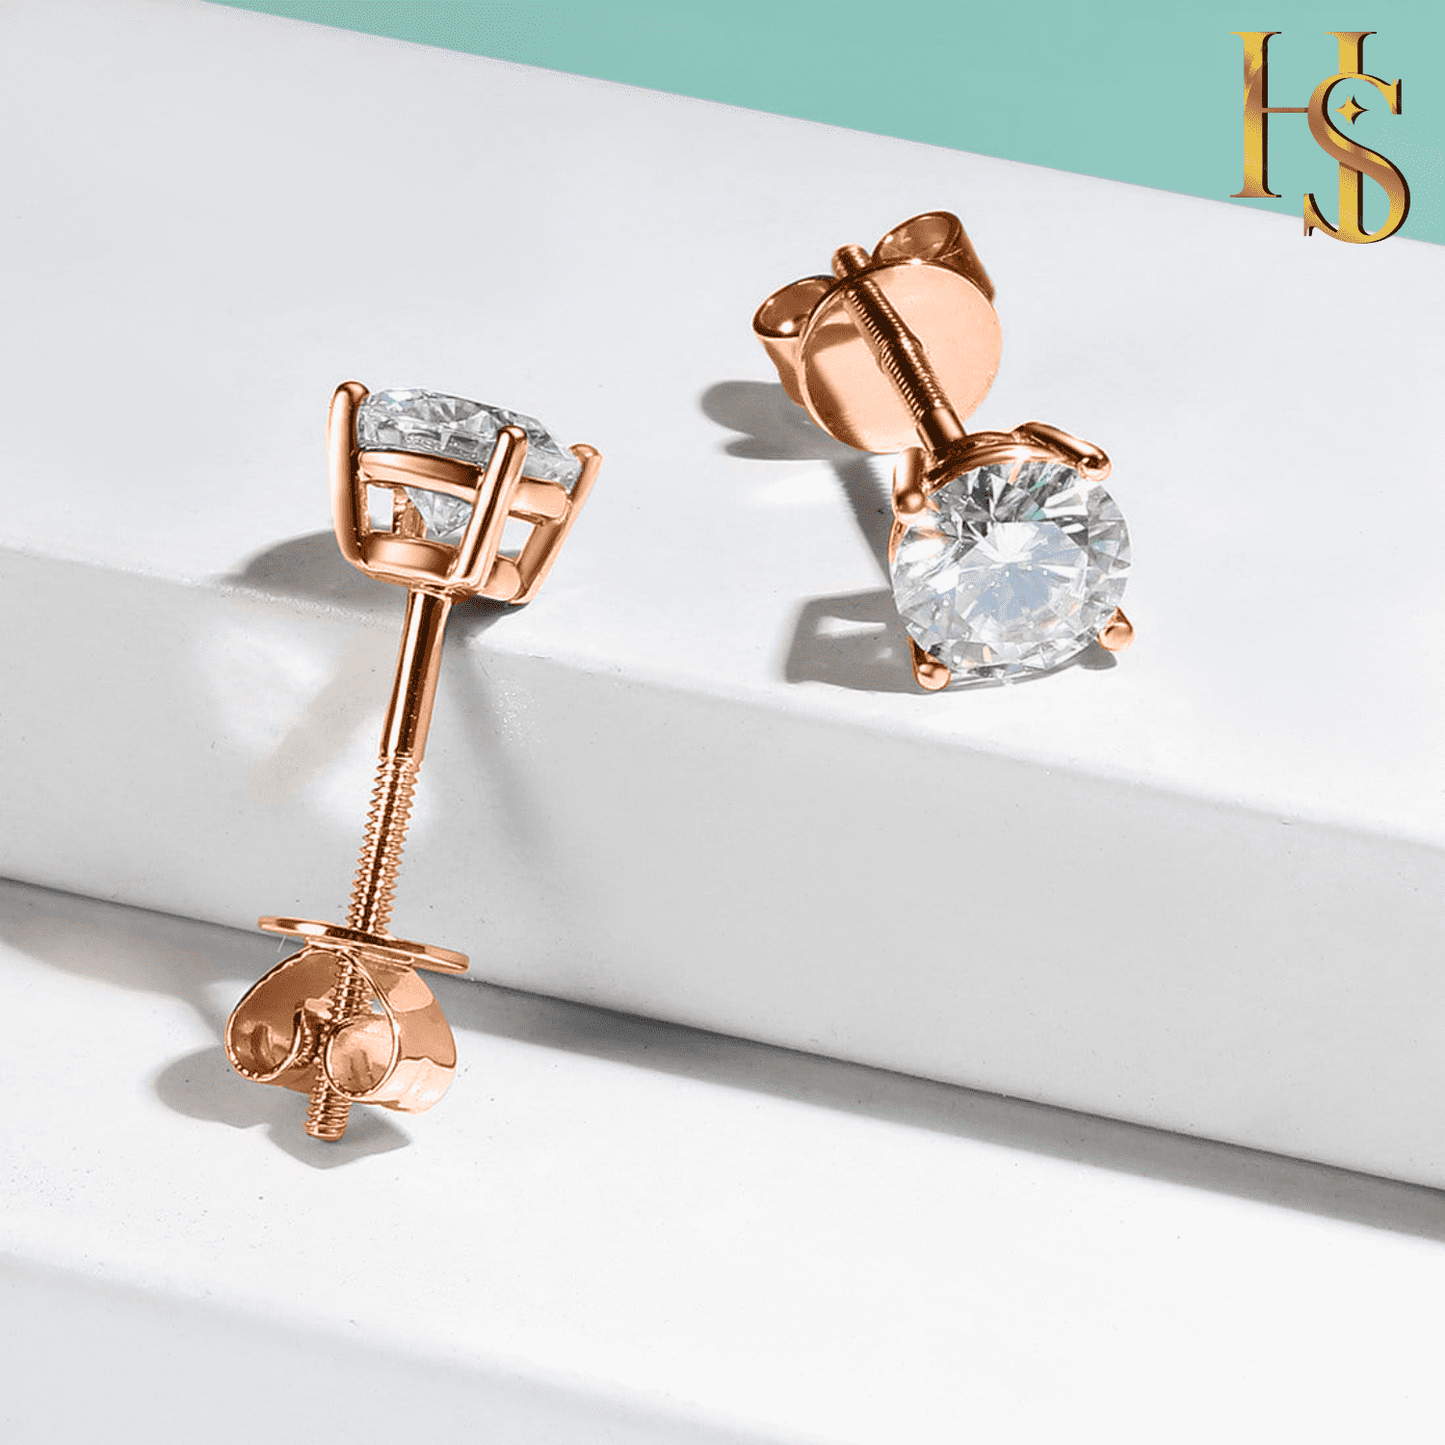 Rose Gold Solitaire Earrings Screwback in 92.5 Silver embellished with Swarovski Zirconia - 92.5 Silver in 18K Rose Gold Finish